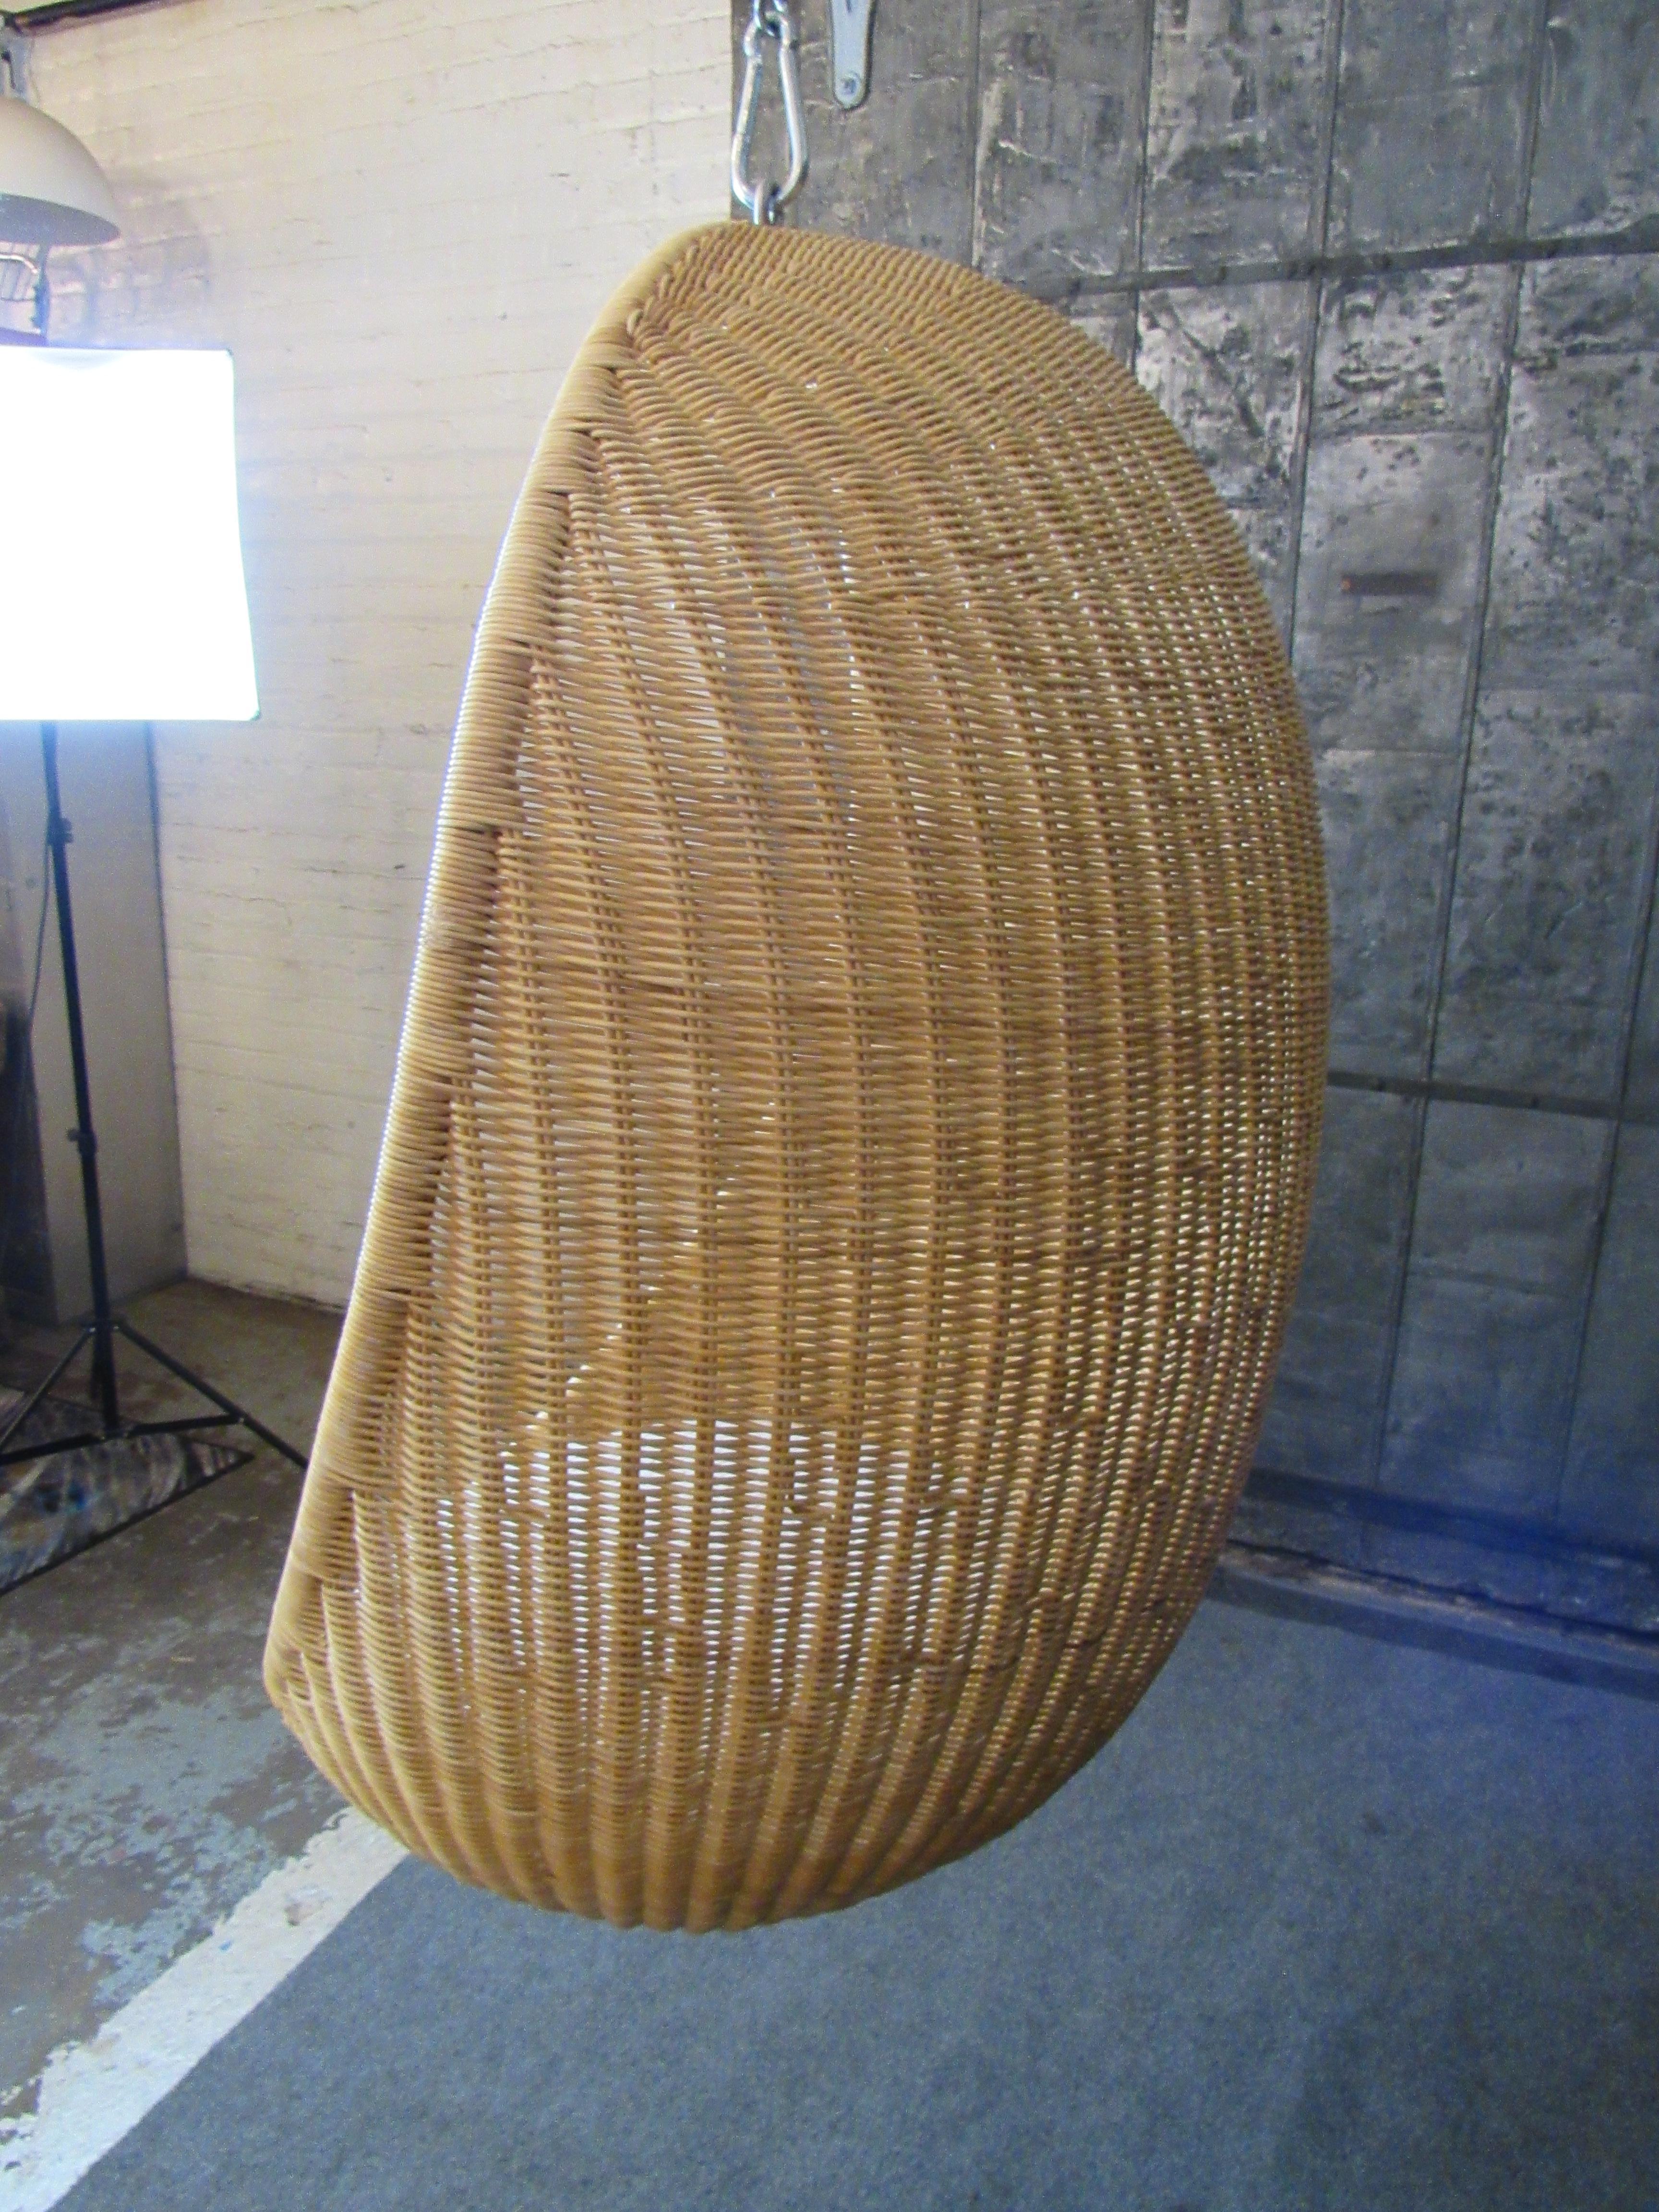 Woven Ditzel Hanging Egg Chair by Sika Design